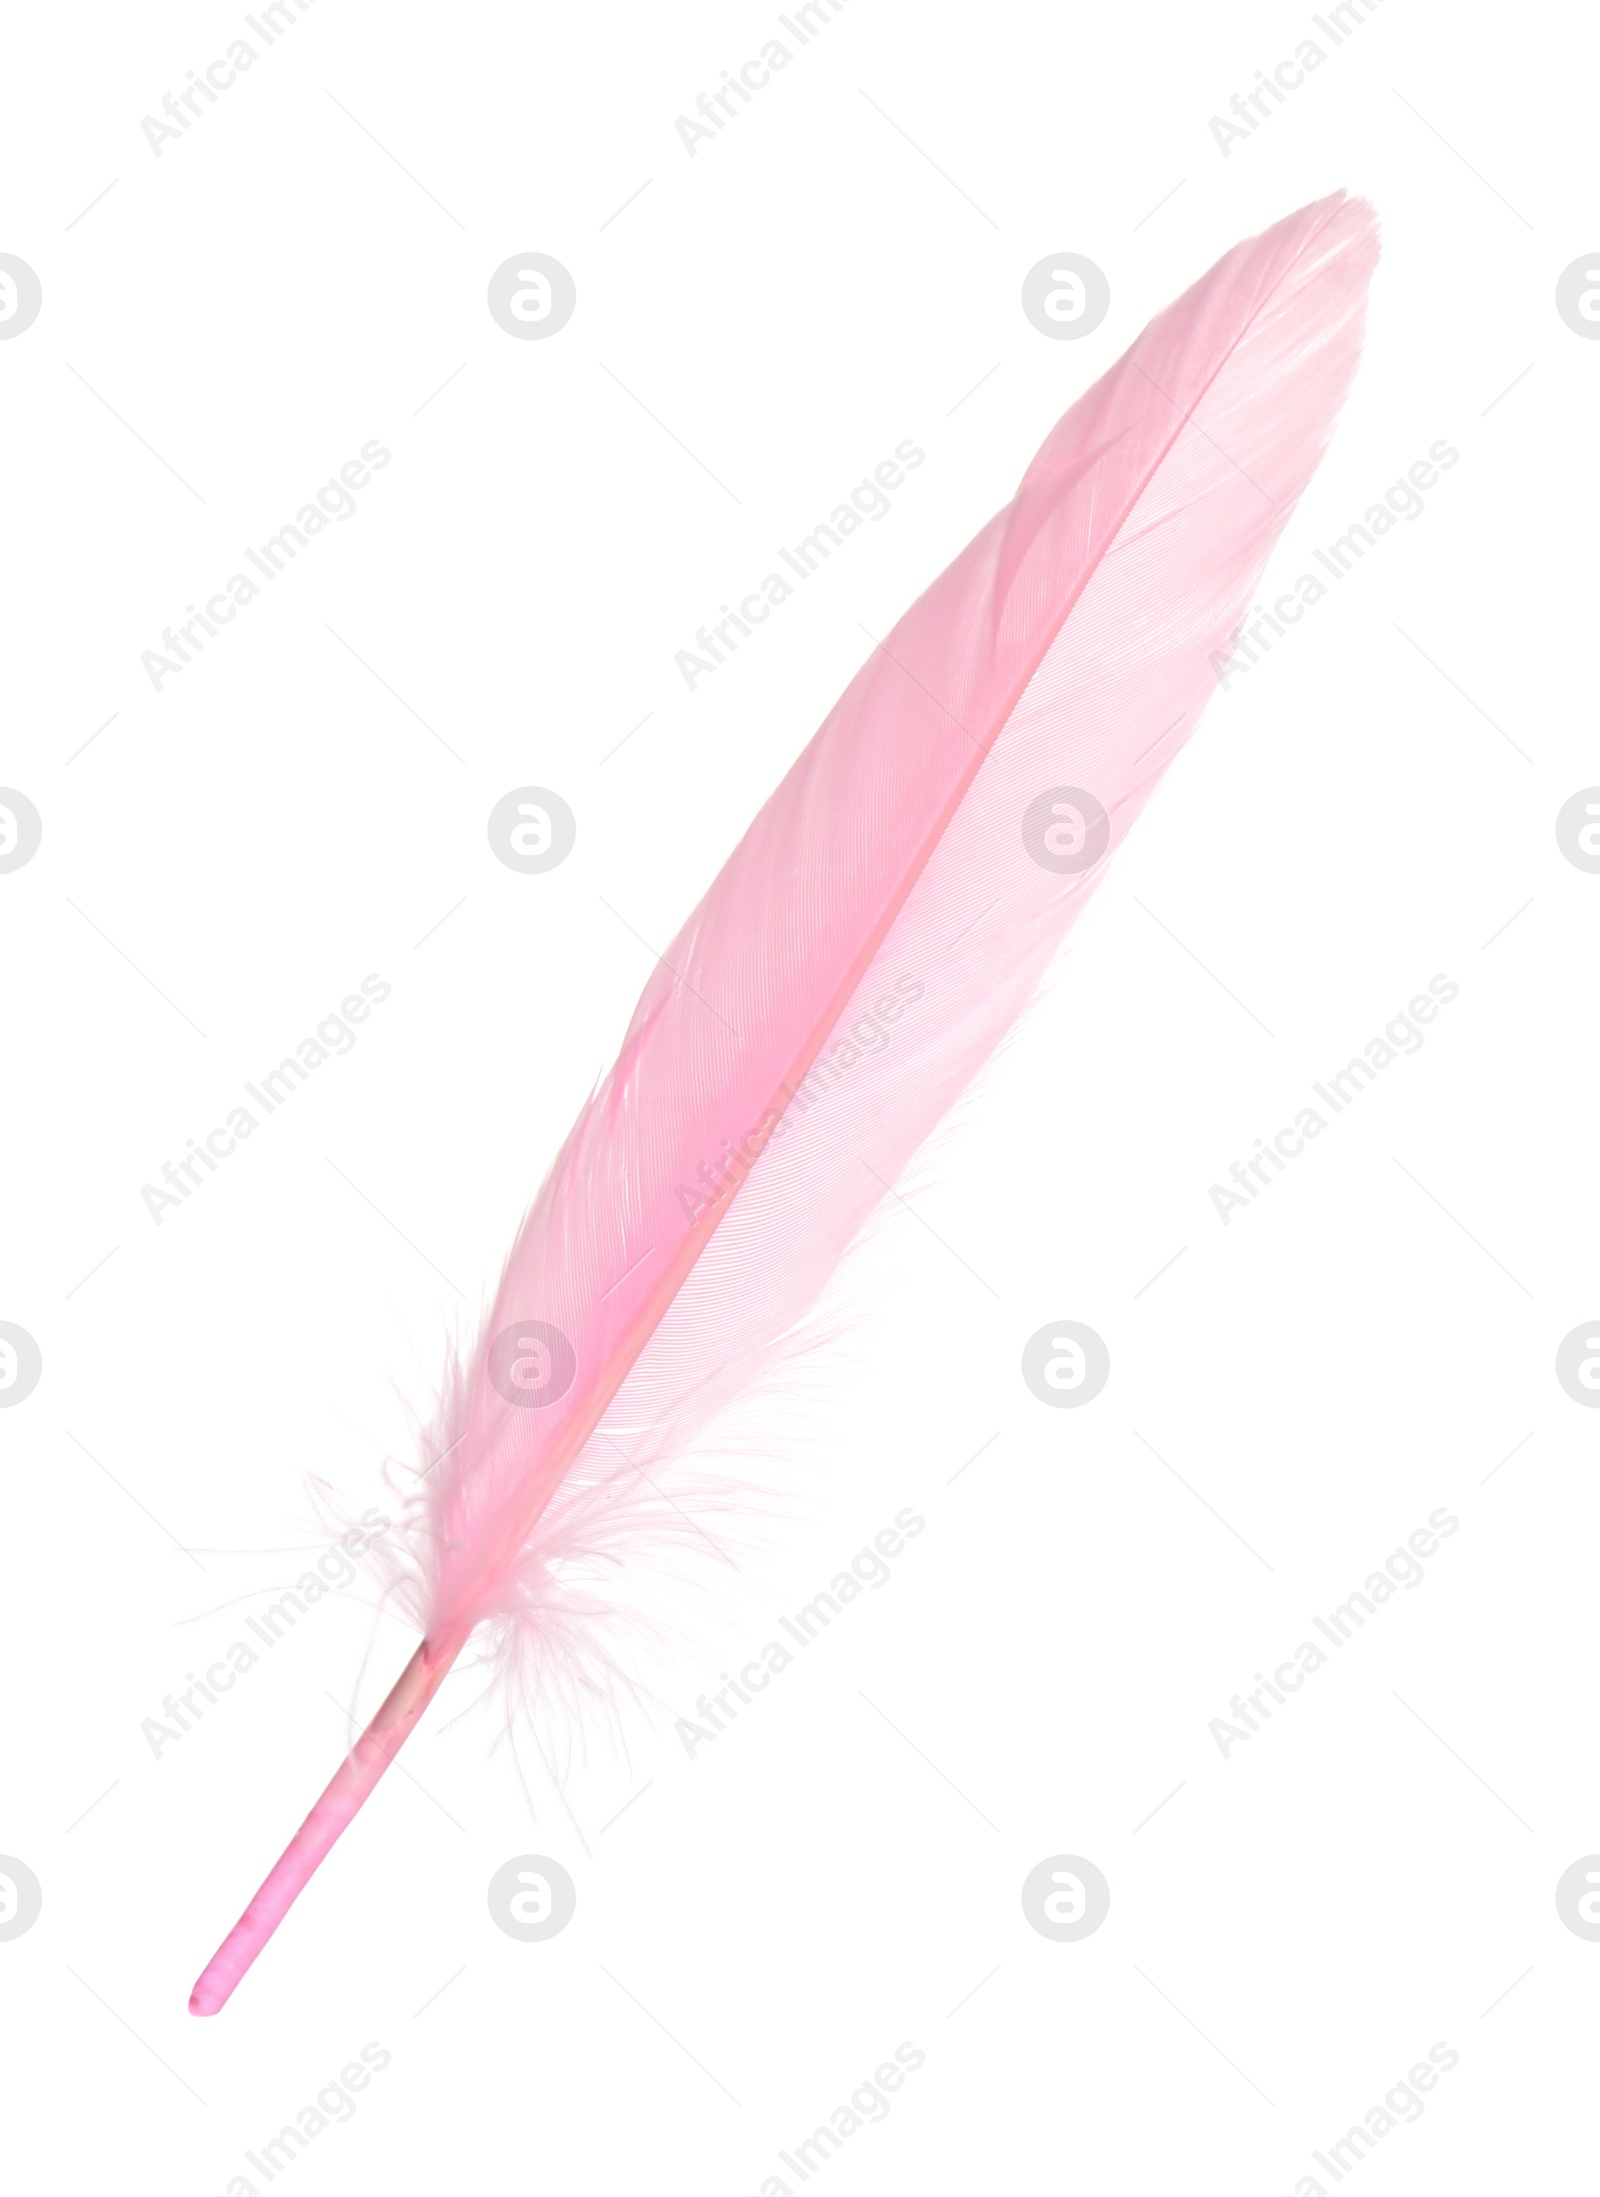 Photo of Beautiful delicate pink feather isolated on white